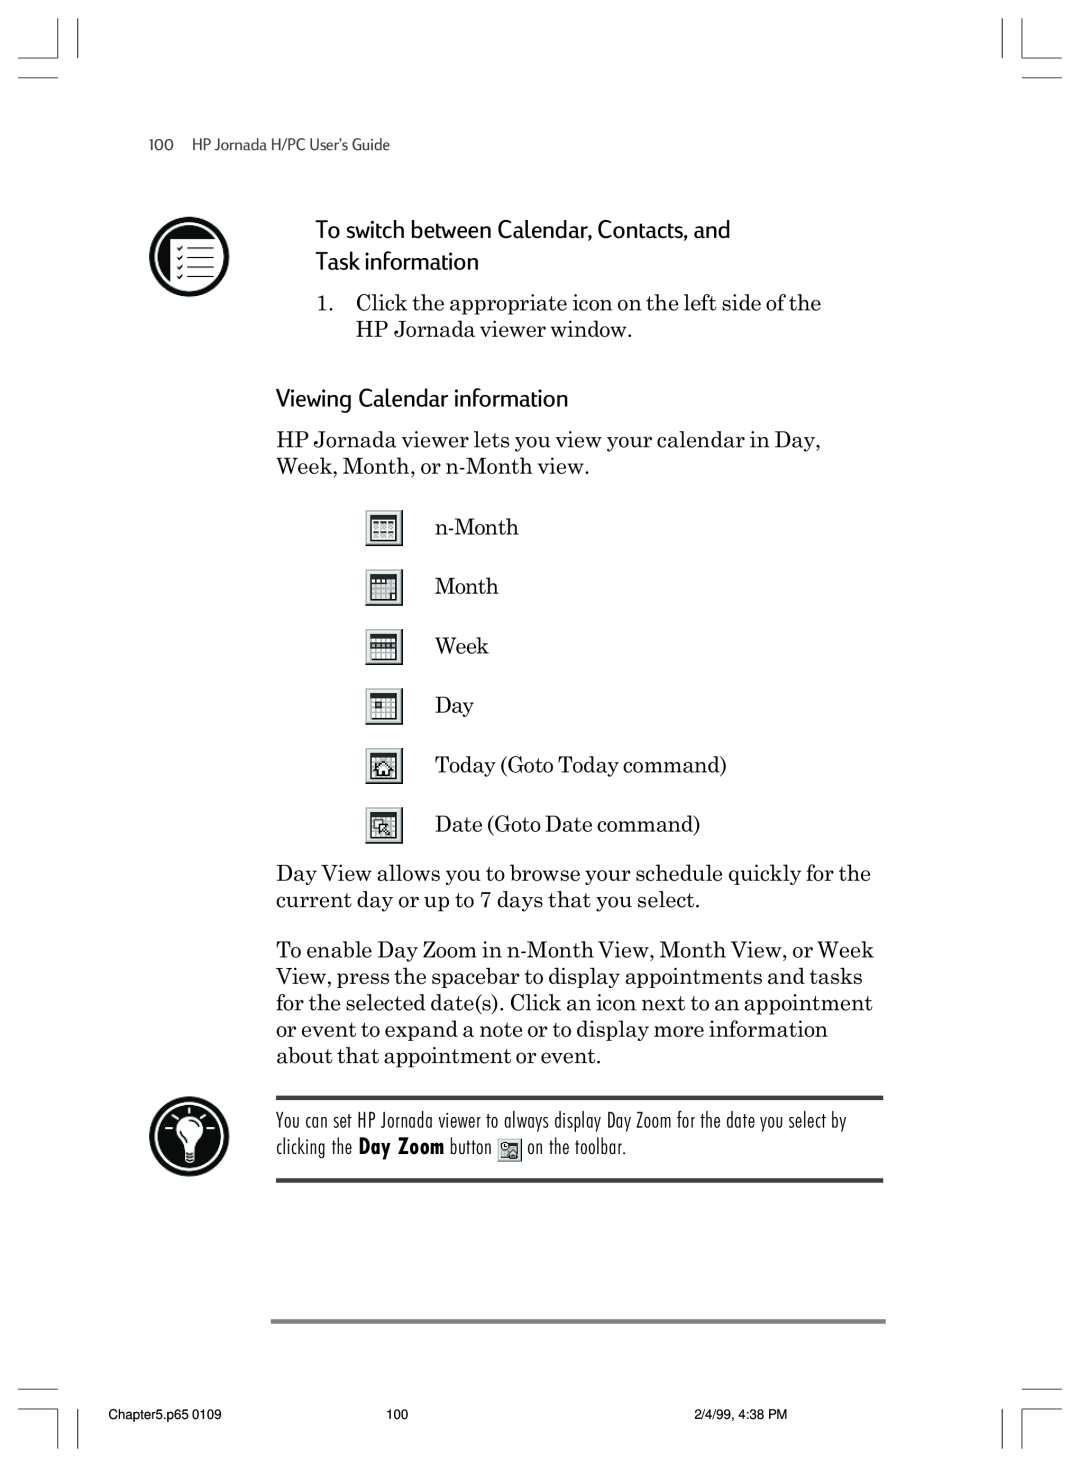 HP 820 E manual To switch between Calendar, Contacts, and Task information, Viewing Calendar information 